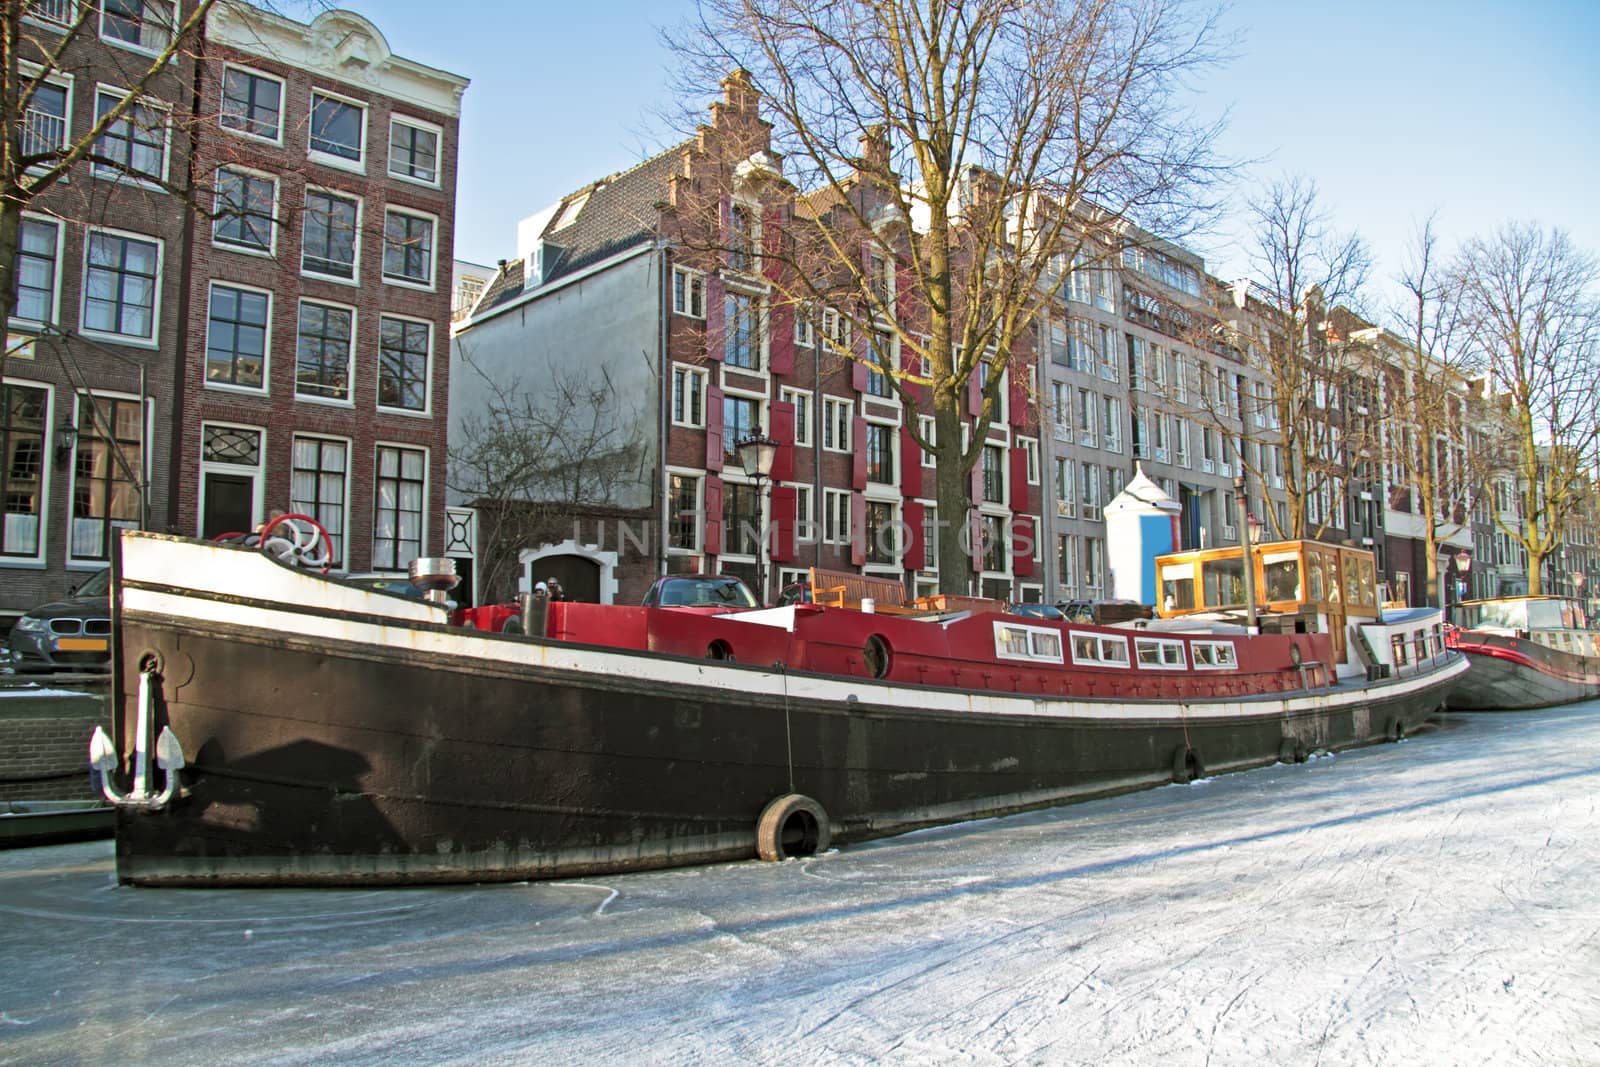 Amsterdam innercity in winter in the Netherlands